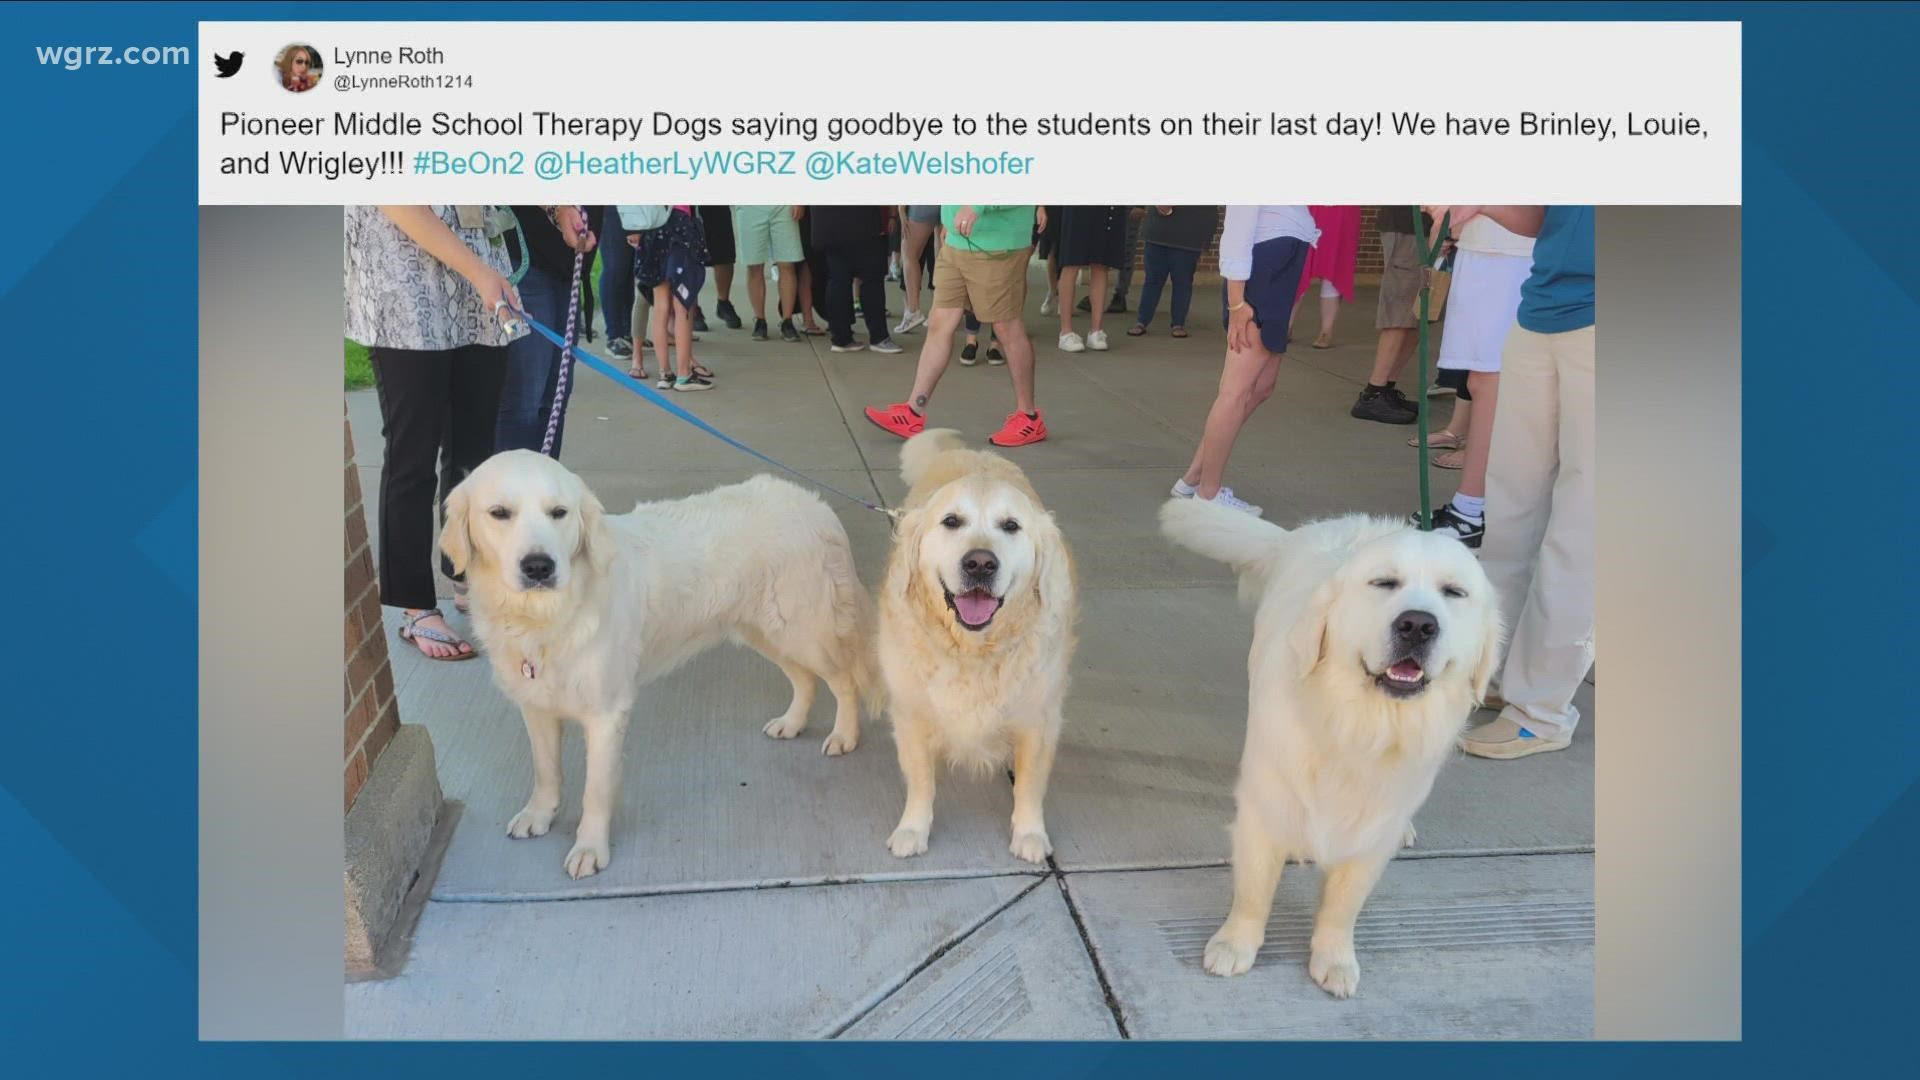 Brinley, Louie, and Wrigley said goodbye to the Pioneer Middle School students on their last day of the school year.